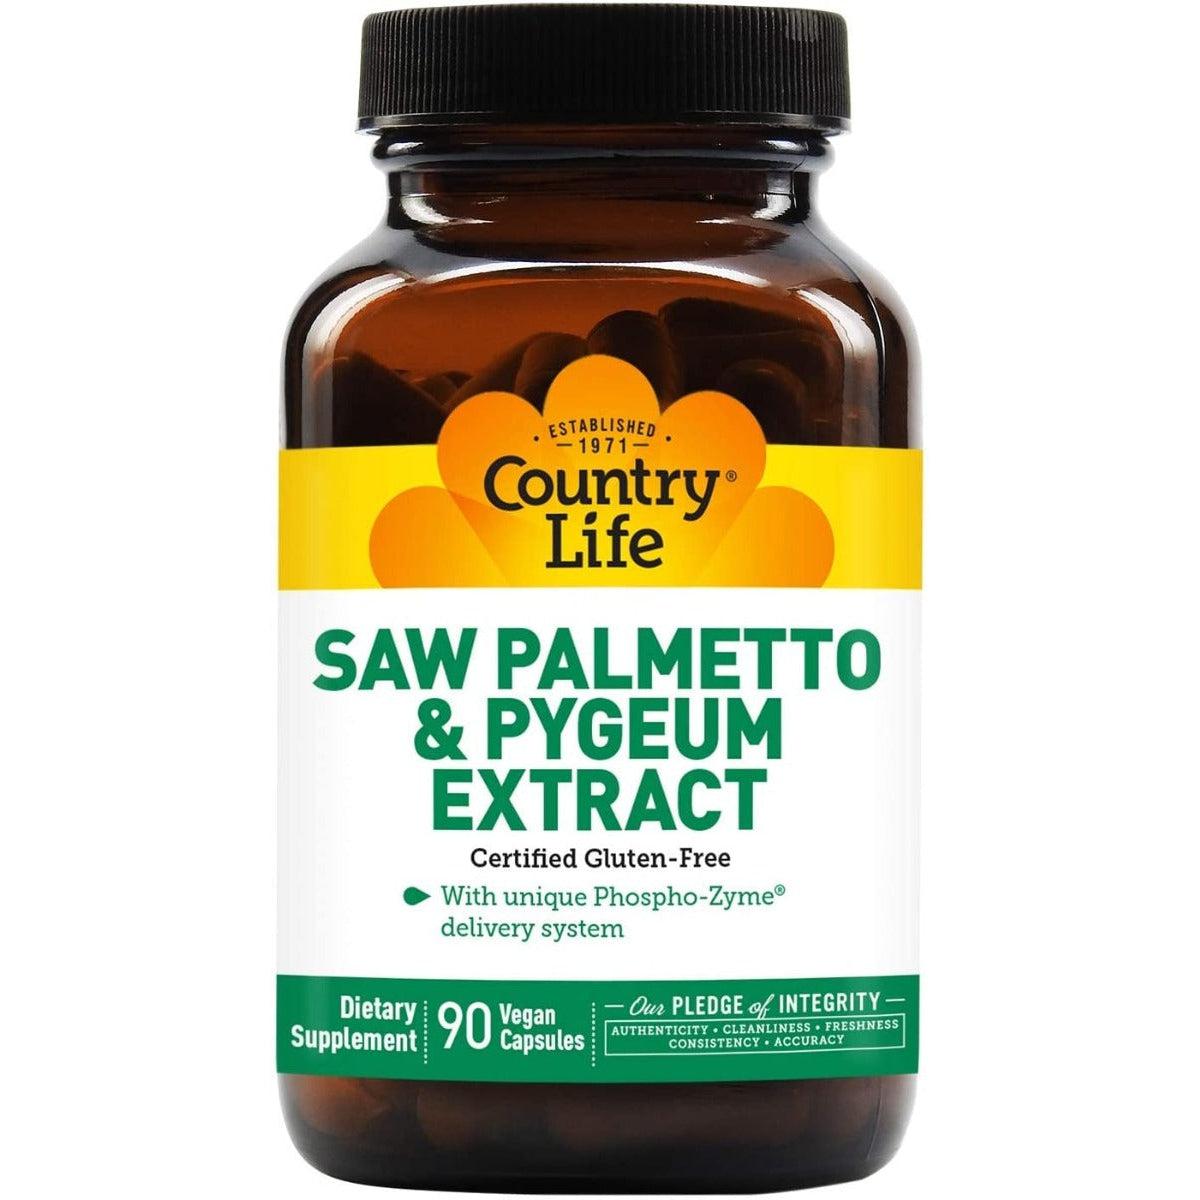 Country Life Saw Palmetto & Pygeum Extract Dairy Free Gluten Free 90 Vegan Capsules